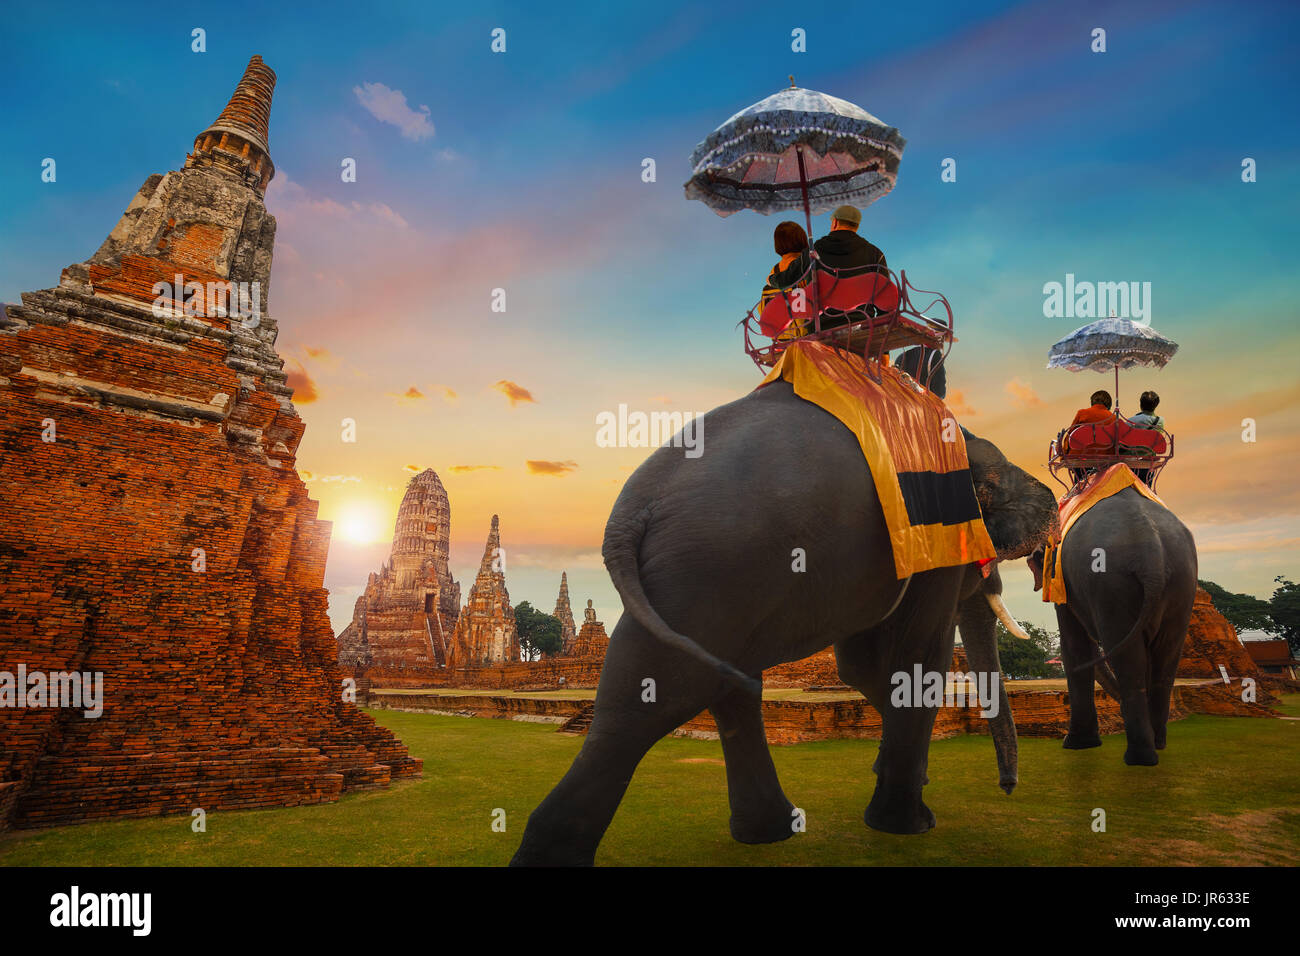 Tourist with Elephant at Wat Chaiwatthanaram temple in Ayuthaya Historical Park, a UNESCO world heritage site, Thailand Stock Photo